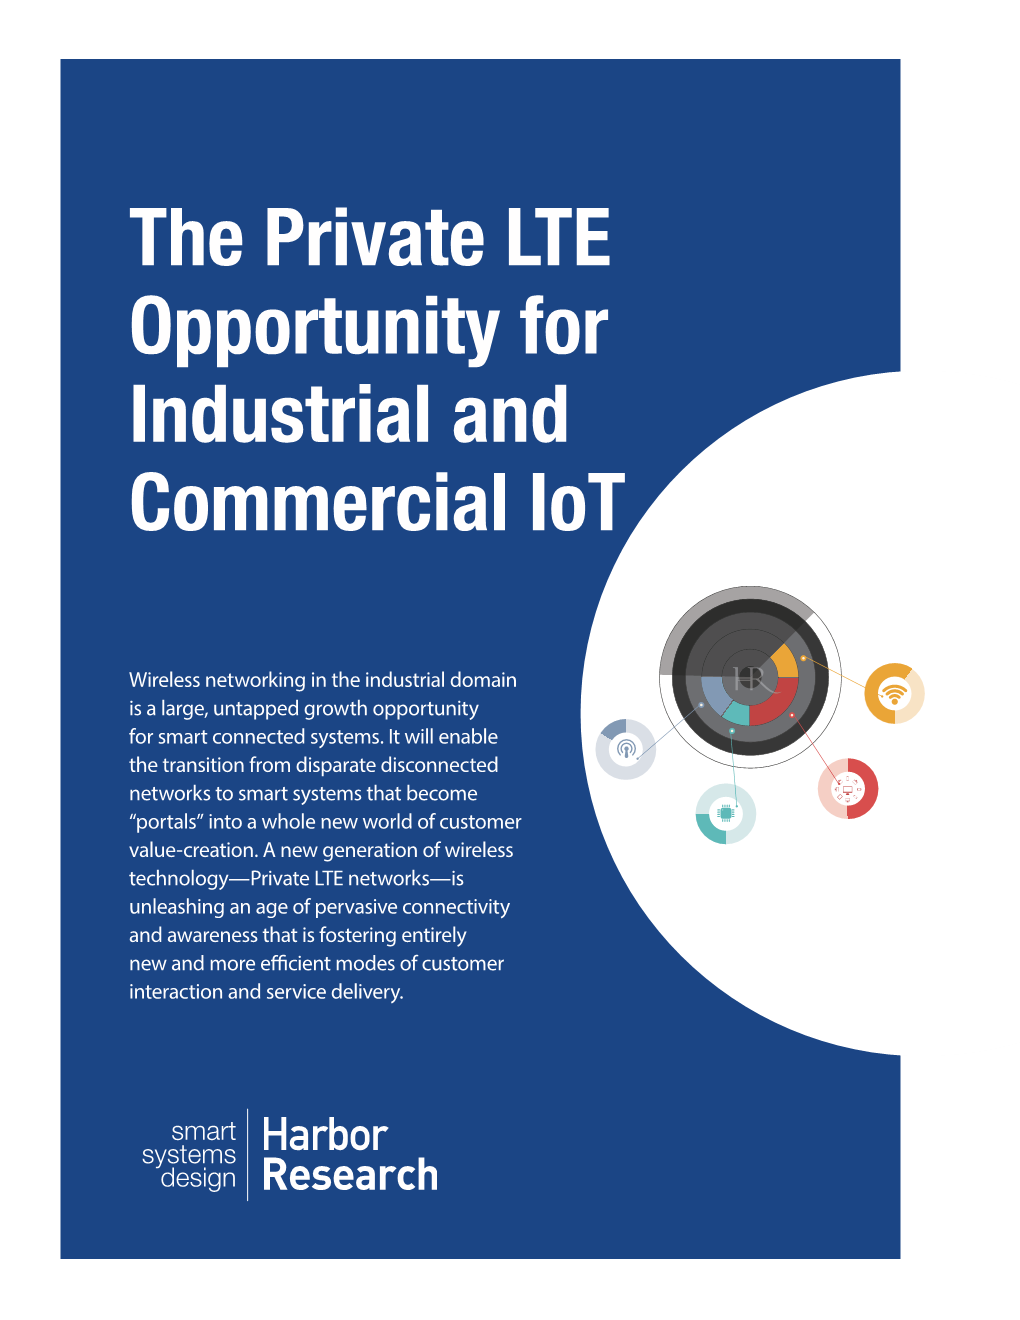 The Private LTE Opportunity for Industrial and Commercial Iot